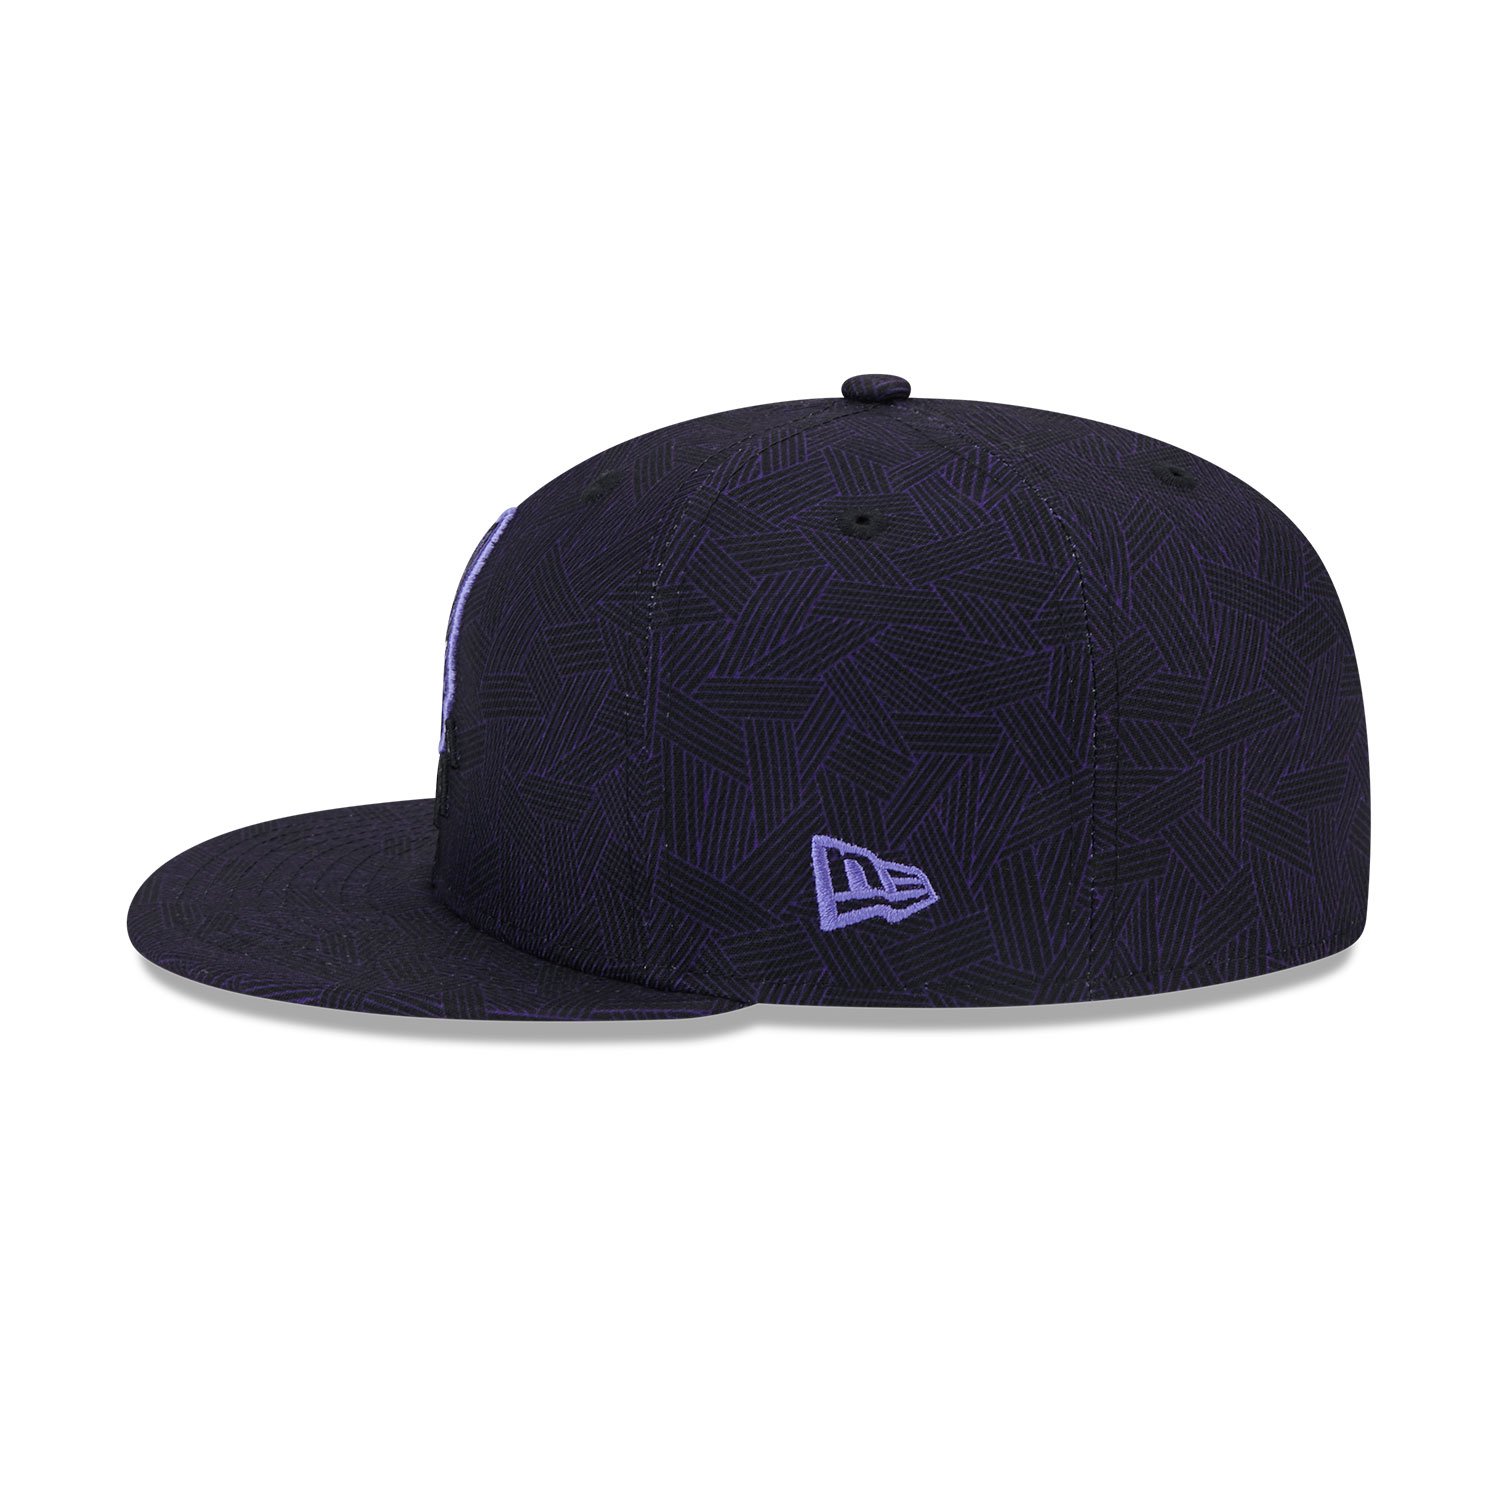 Black Panther Purple and Black 59FIFTY Fitted Cap